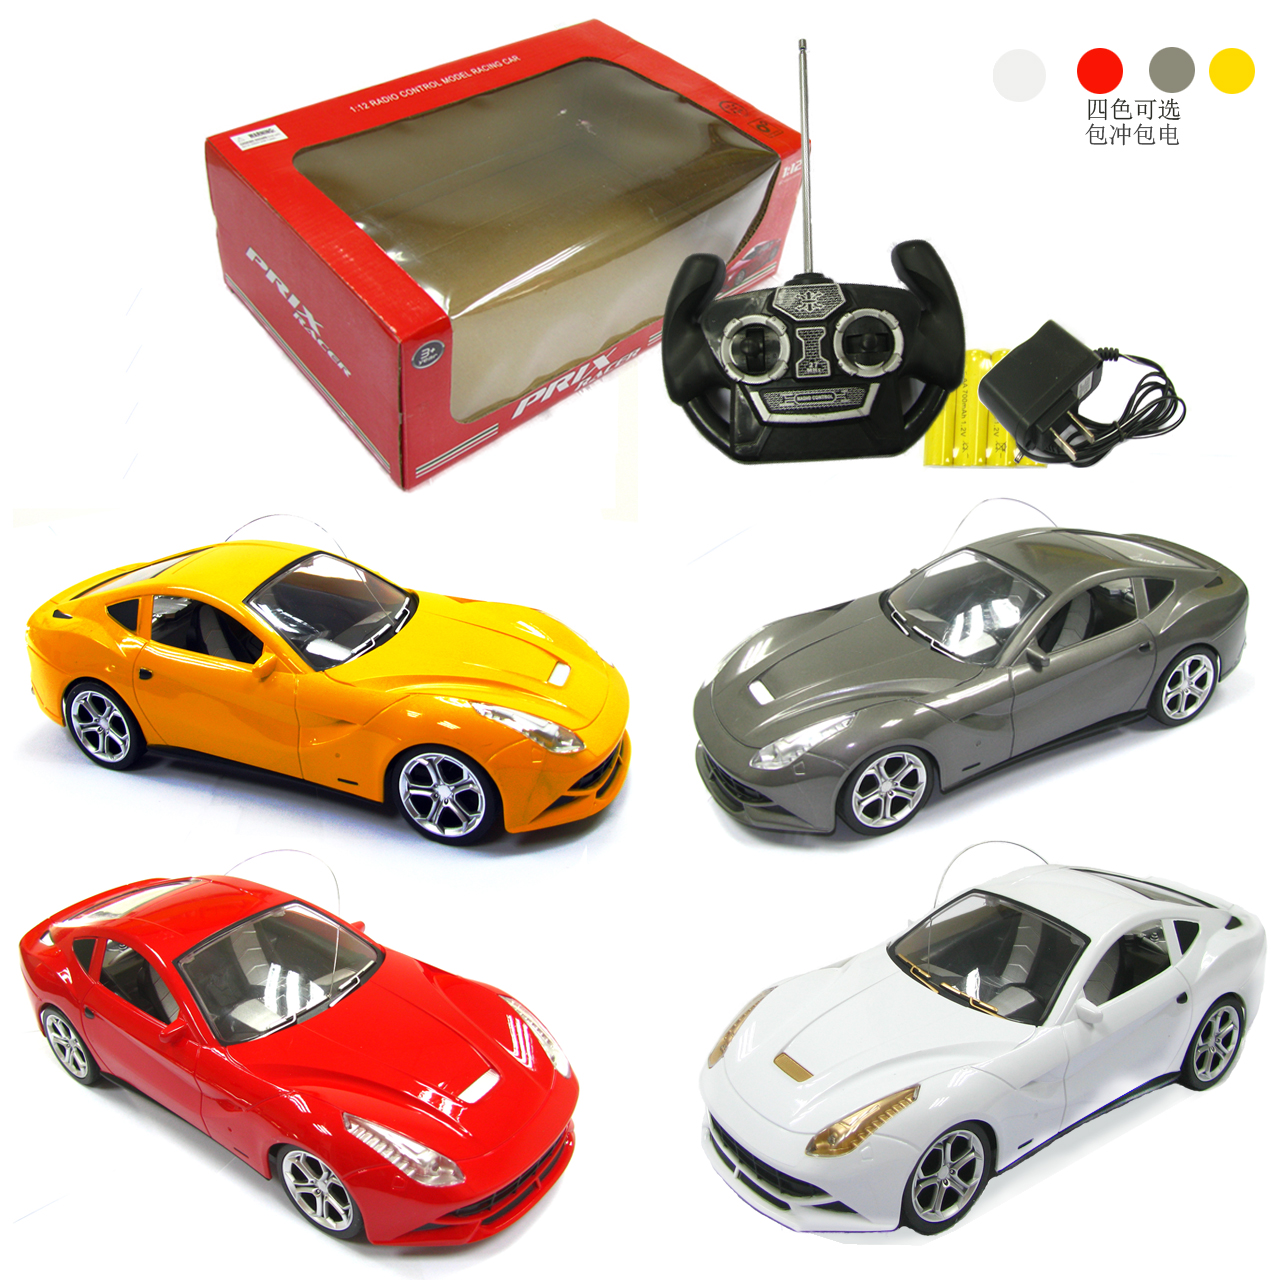 1:12 four - way remote control car racing and charged with filling, two headlights